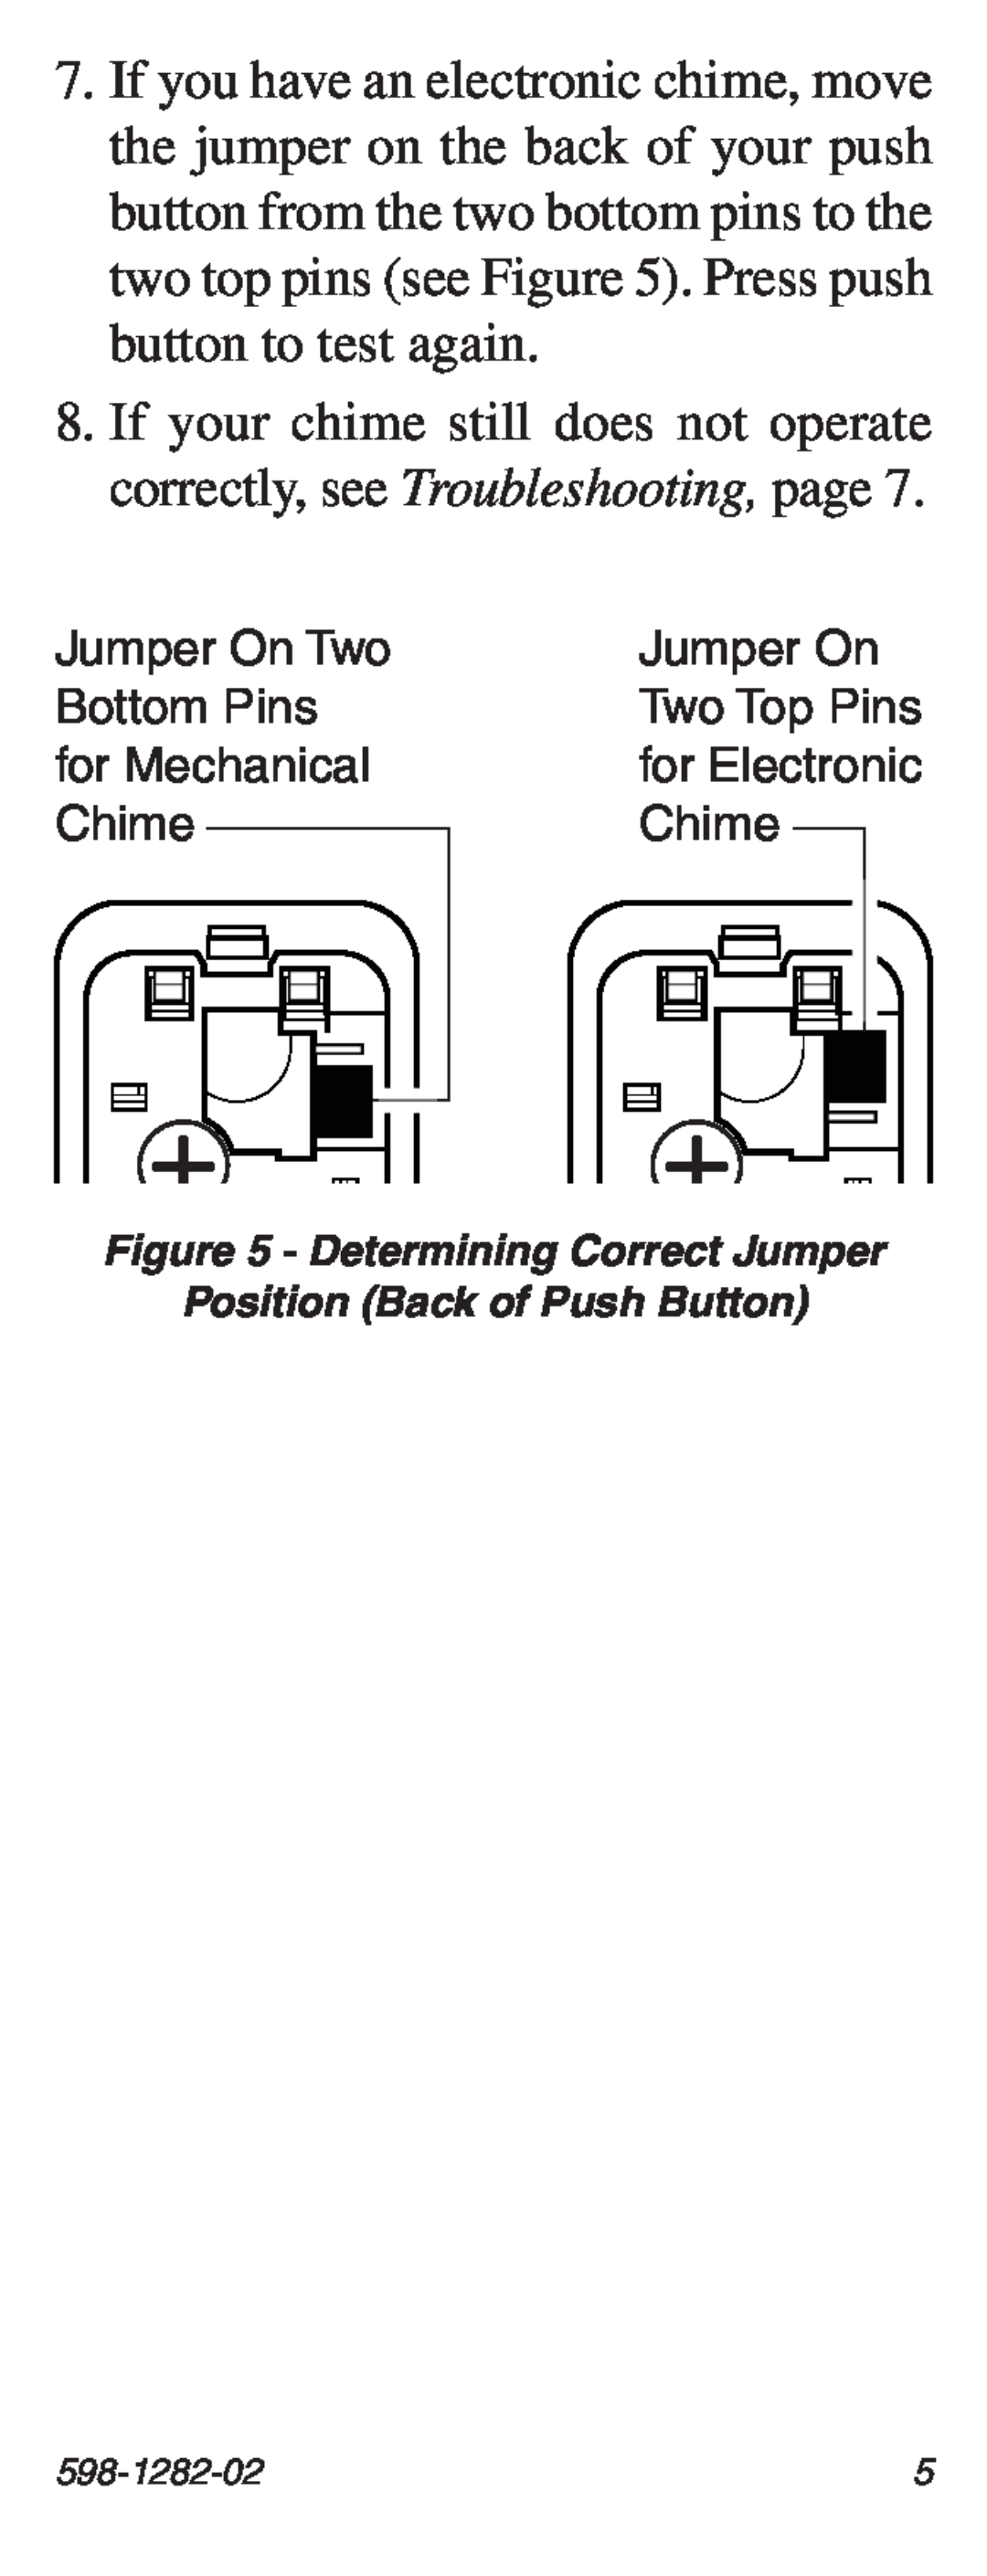 Heath Zenith 598-1282-02 manual Jumper On Two Top Pins for Electronic Chime, Determining Correct Jumper 